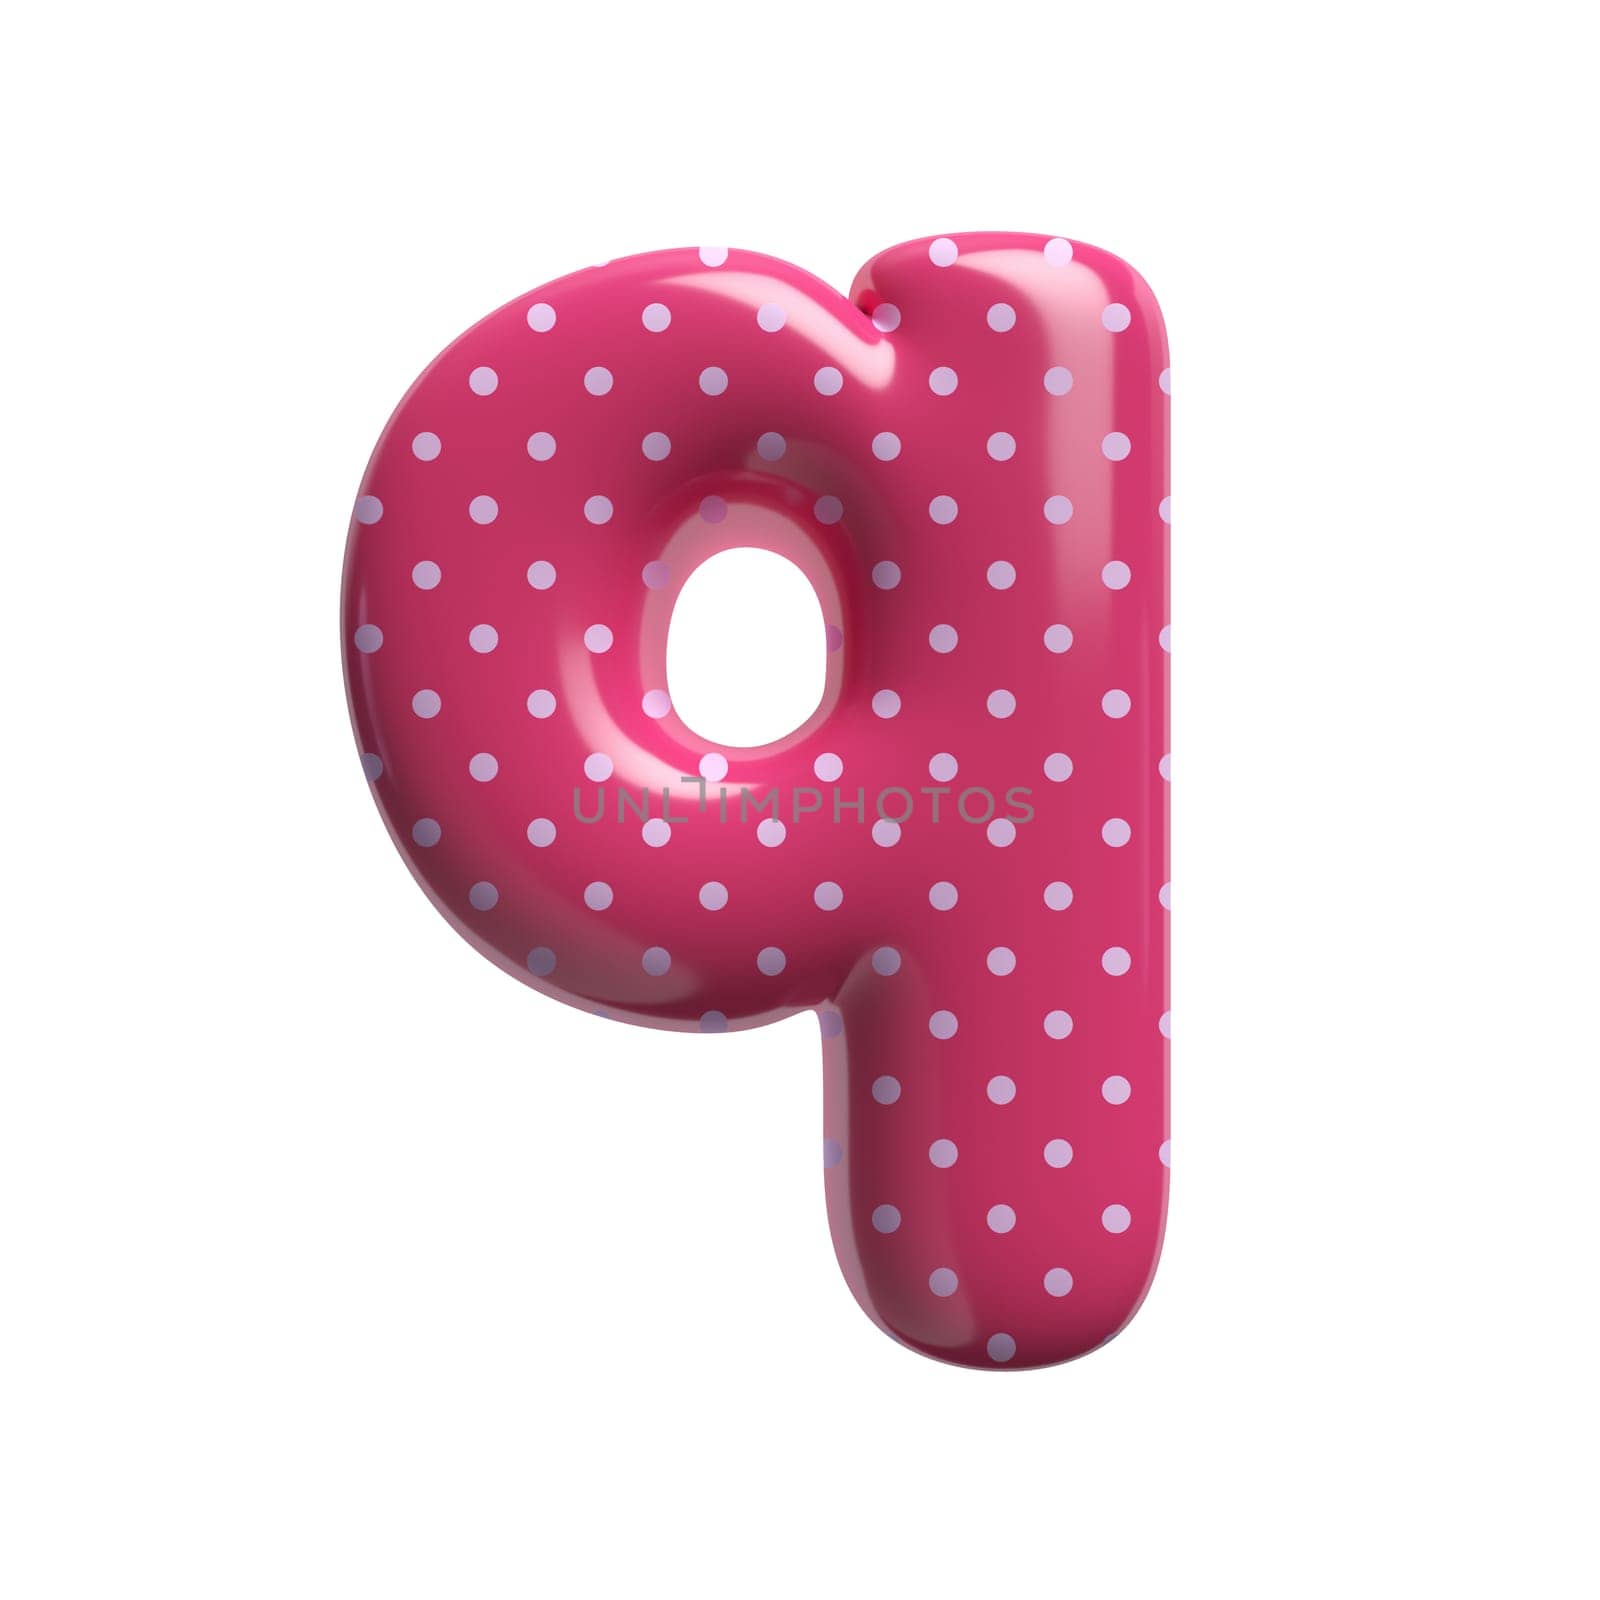 Polka dot letter Q - Small 3d pink retro font isolated on white background. This alphabet is perfect for creative illustrations related but not limited to Fashion, retro design, decoration...